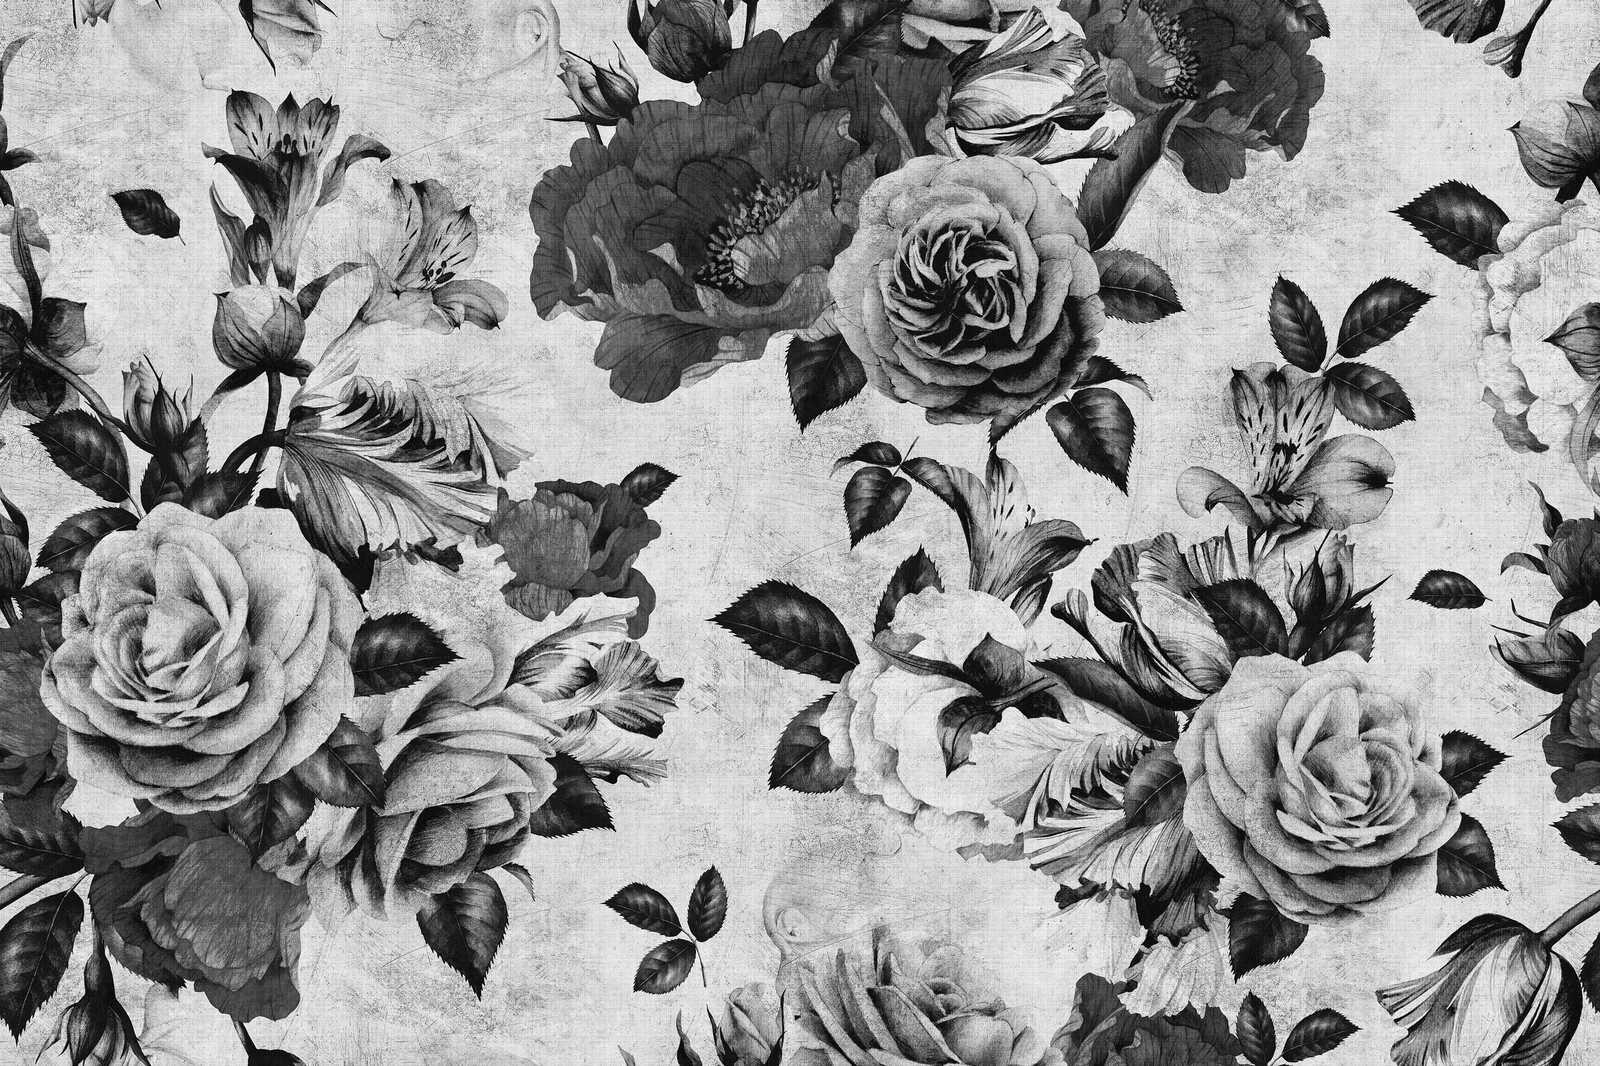             Spanish rose 1 - Roses canvas painting with black and white flowers - 1,20 m x 0,80 m
        